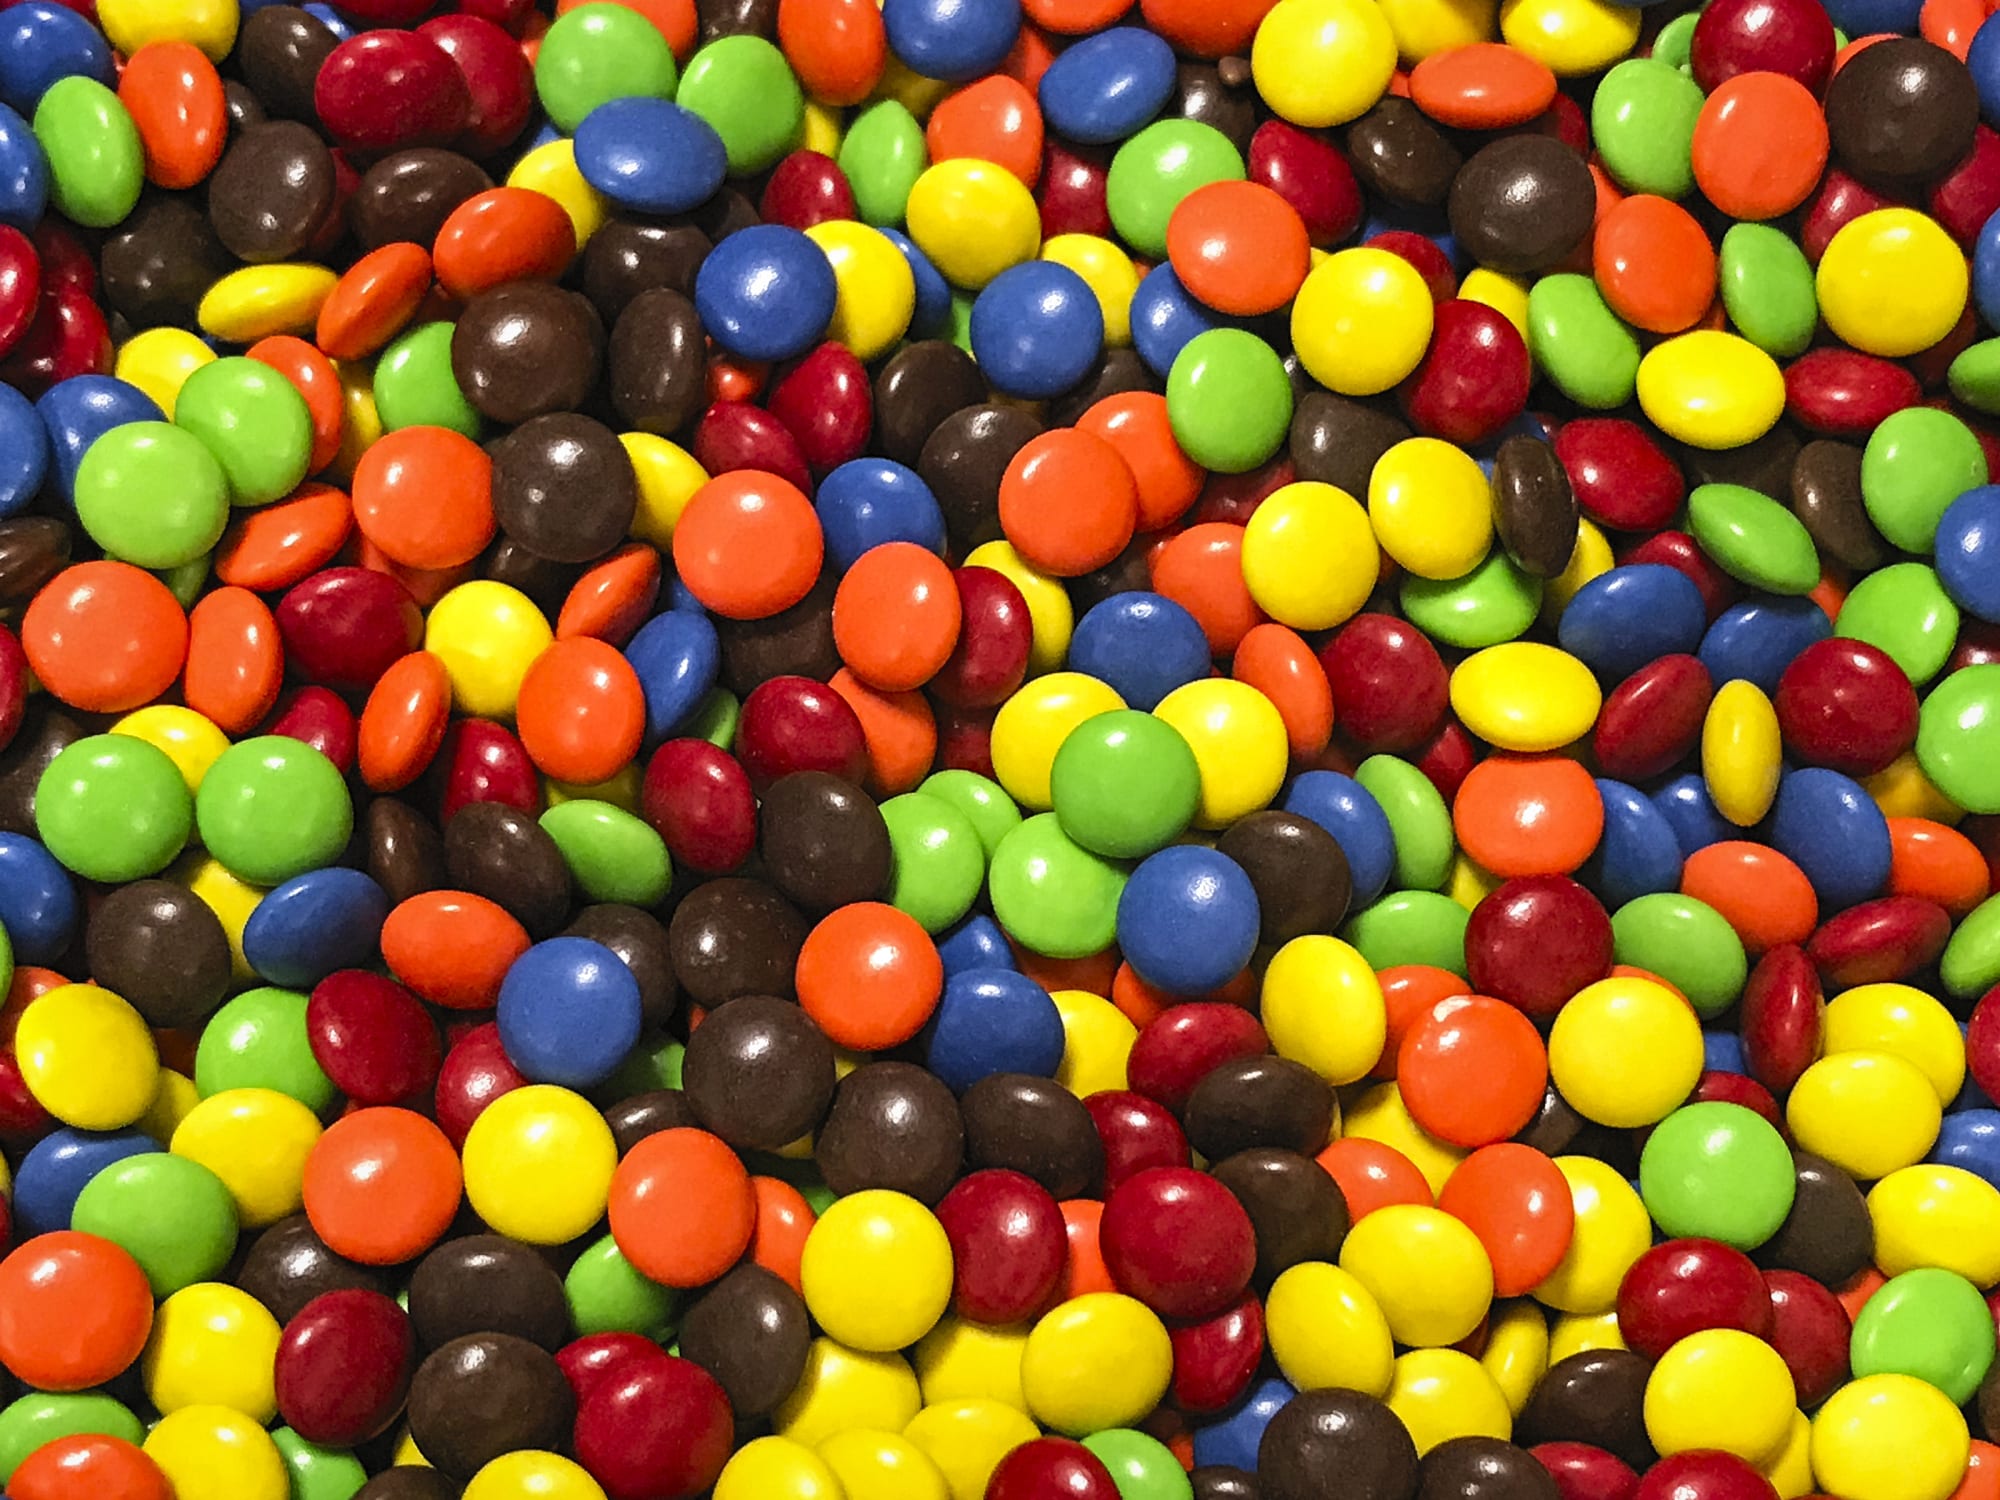 M&Ms' beloved characters are getting a new look, National News